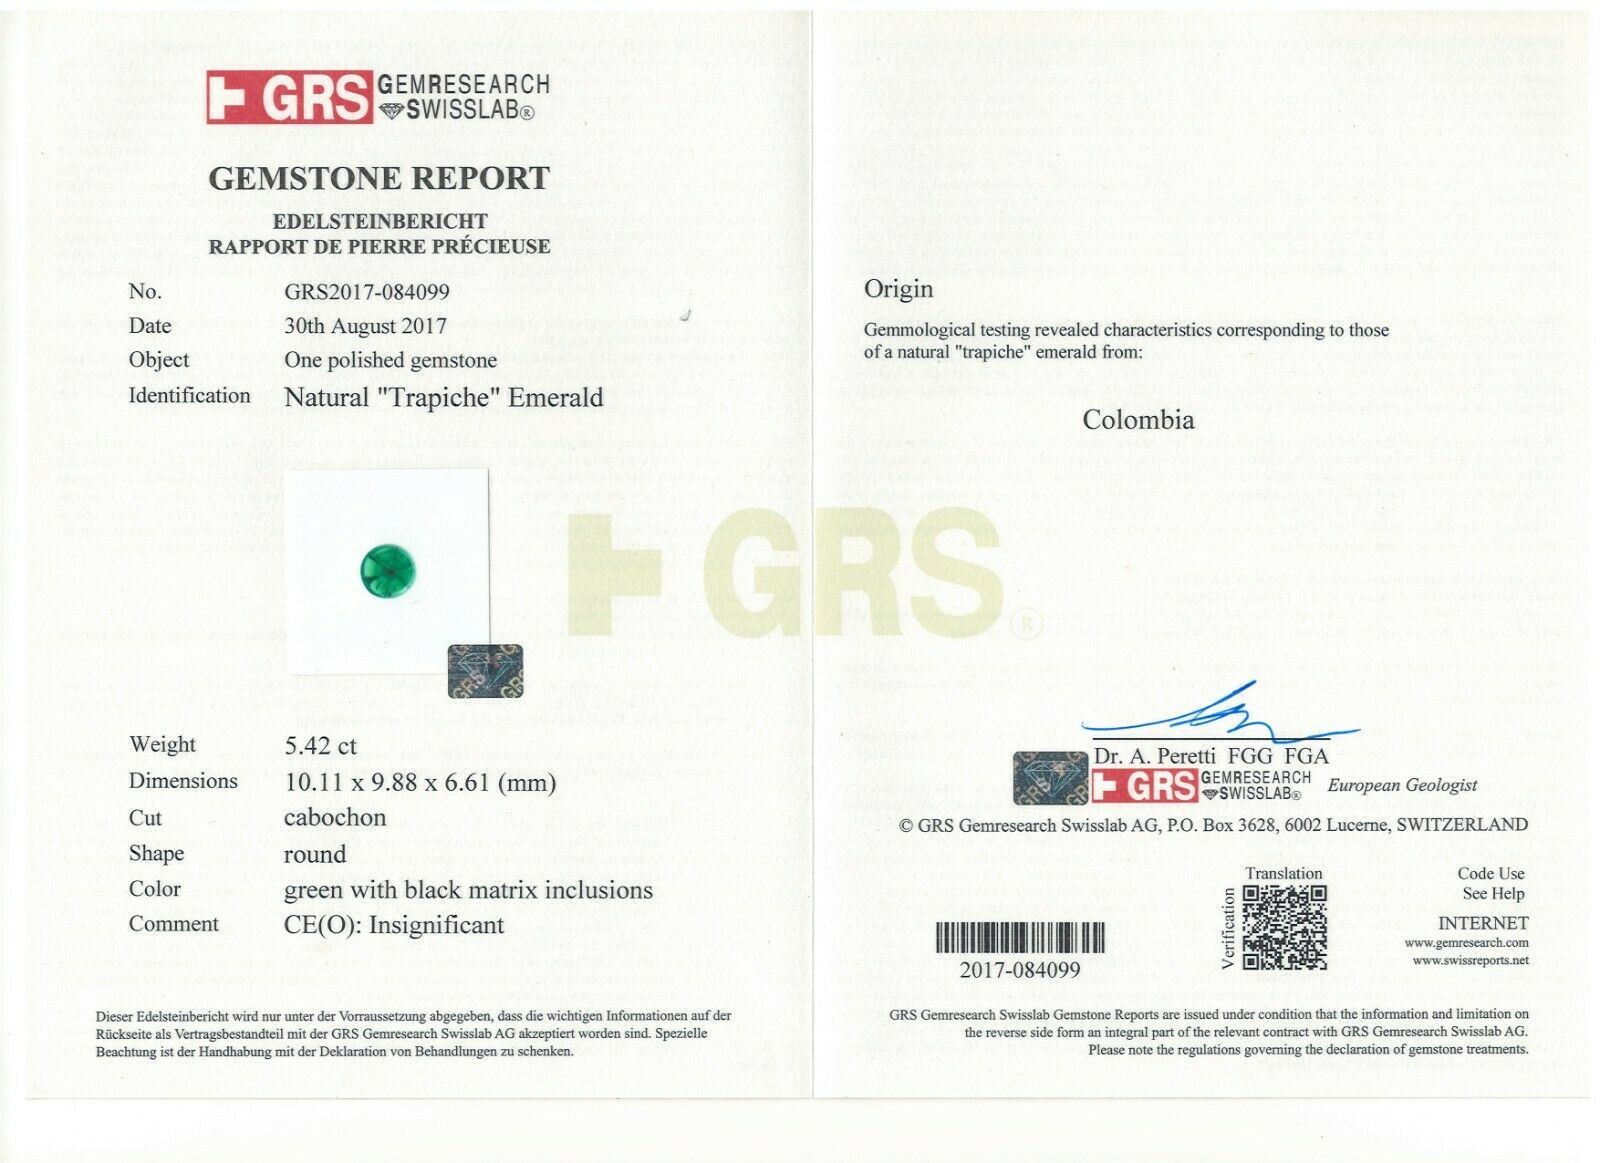 GRS Gemstone Report for a 5.42 ct. natural Colombian trapiche emerald